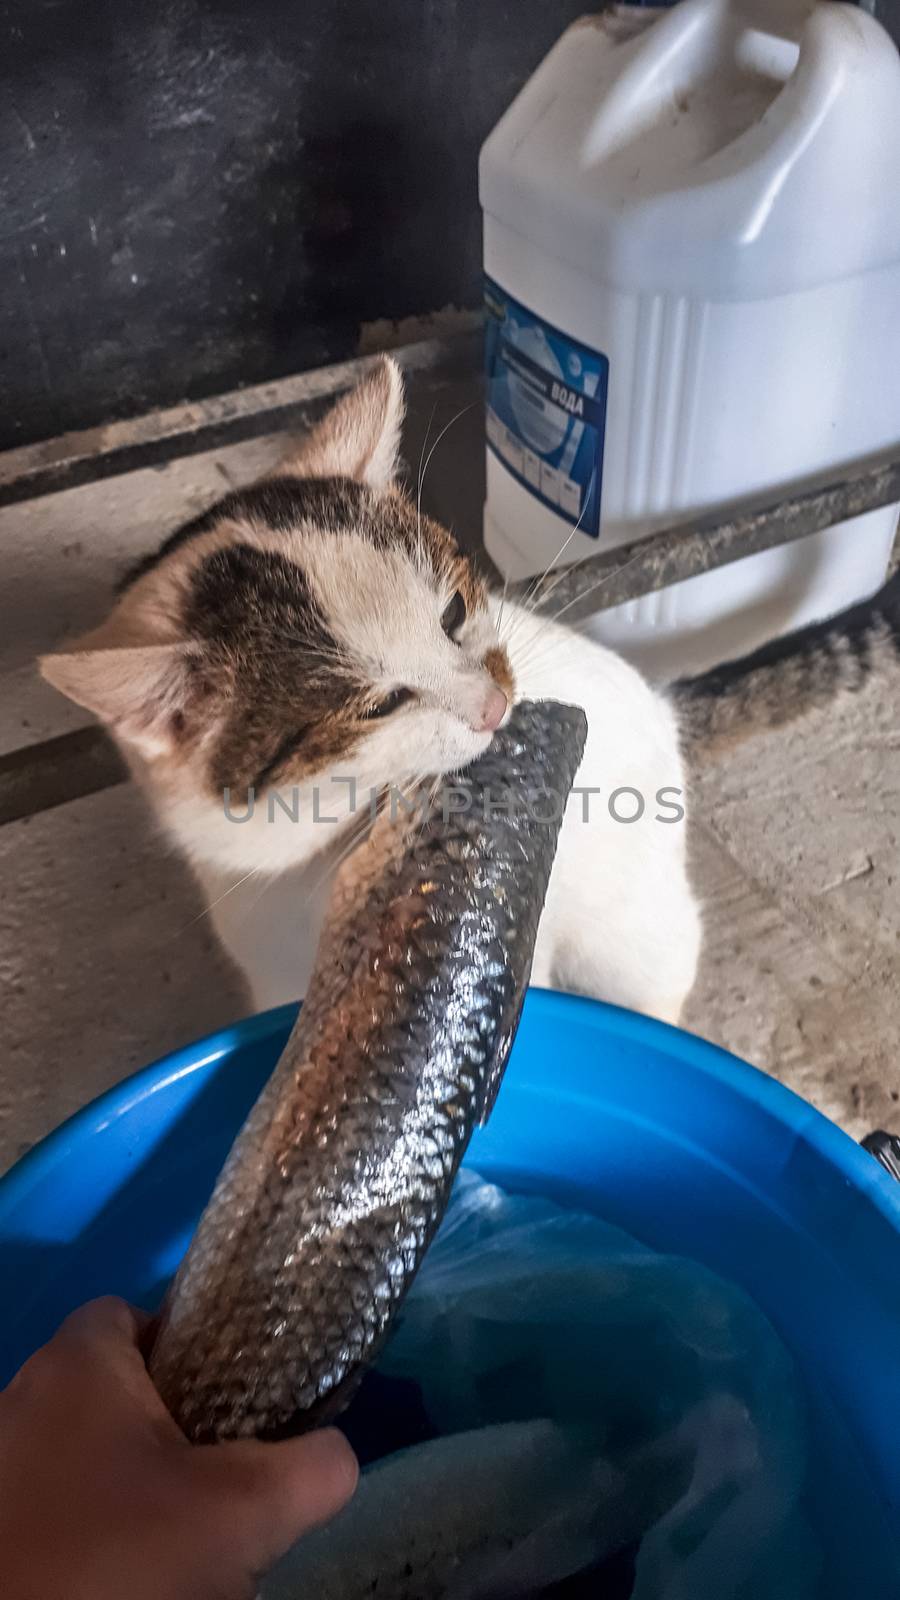 The cat eats fish from a bucket. Fish catch for cat.